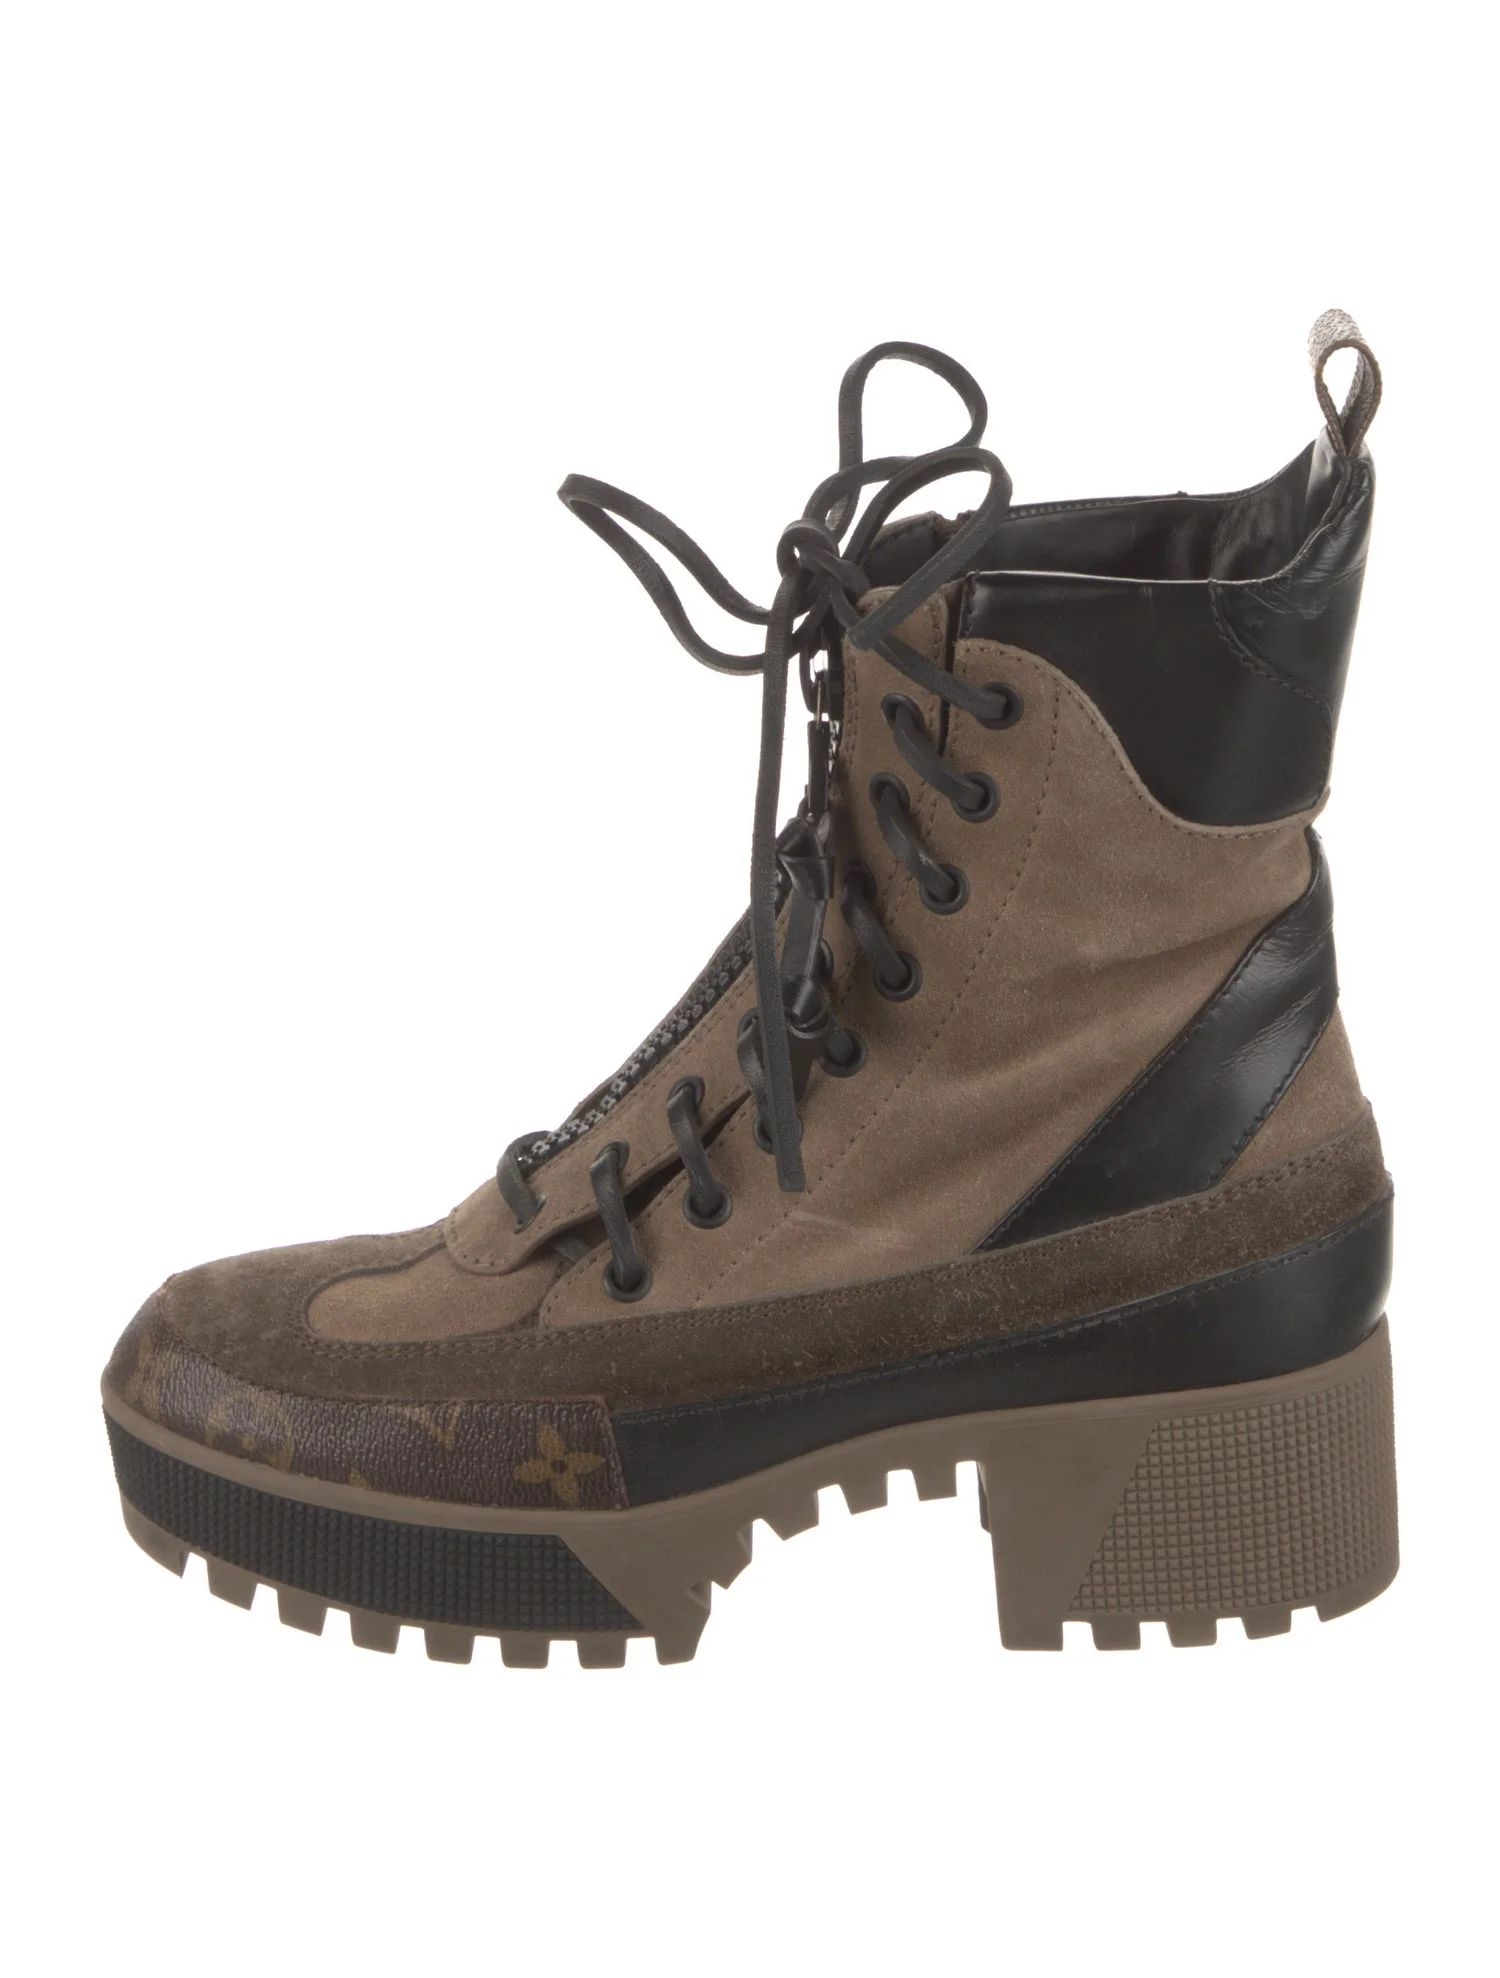 LV Monogram Suede Combat Boots | The RealReal